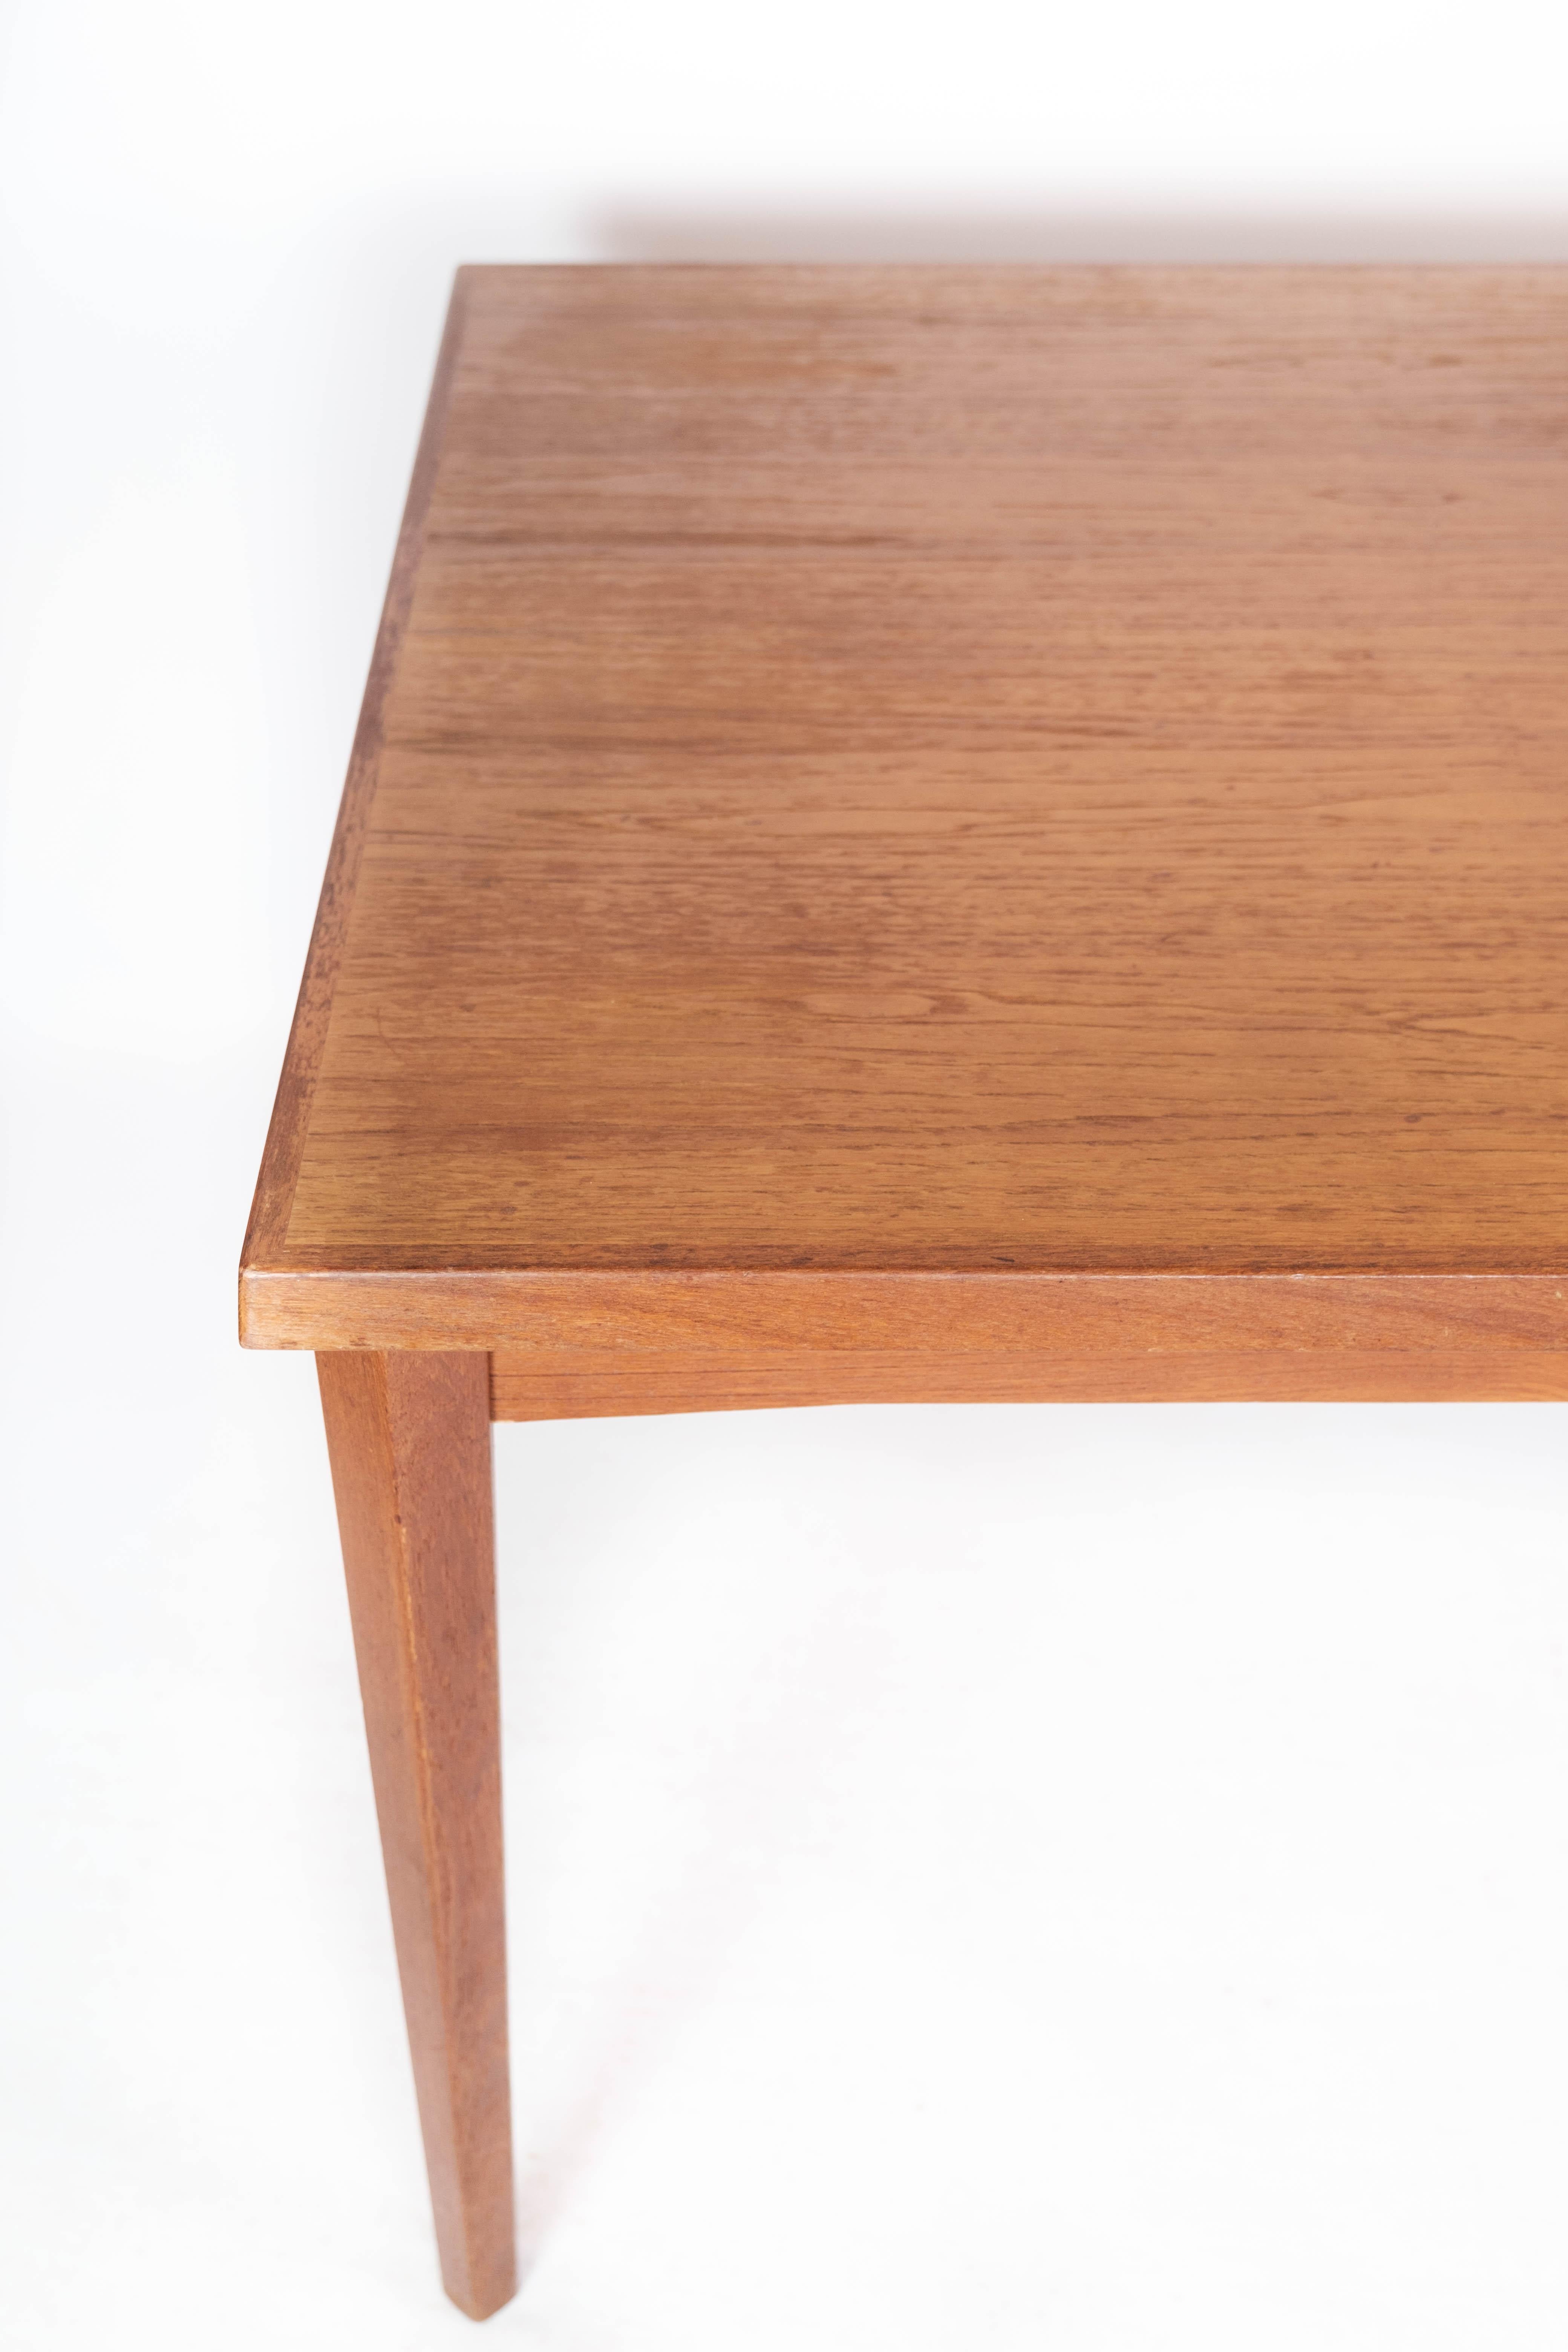 Scandinavian Modern Dining Table in Teak with Extension Plates, of Danish Design from the 1960s For Sale